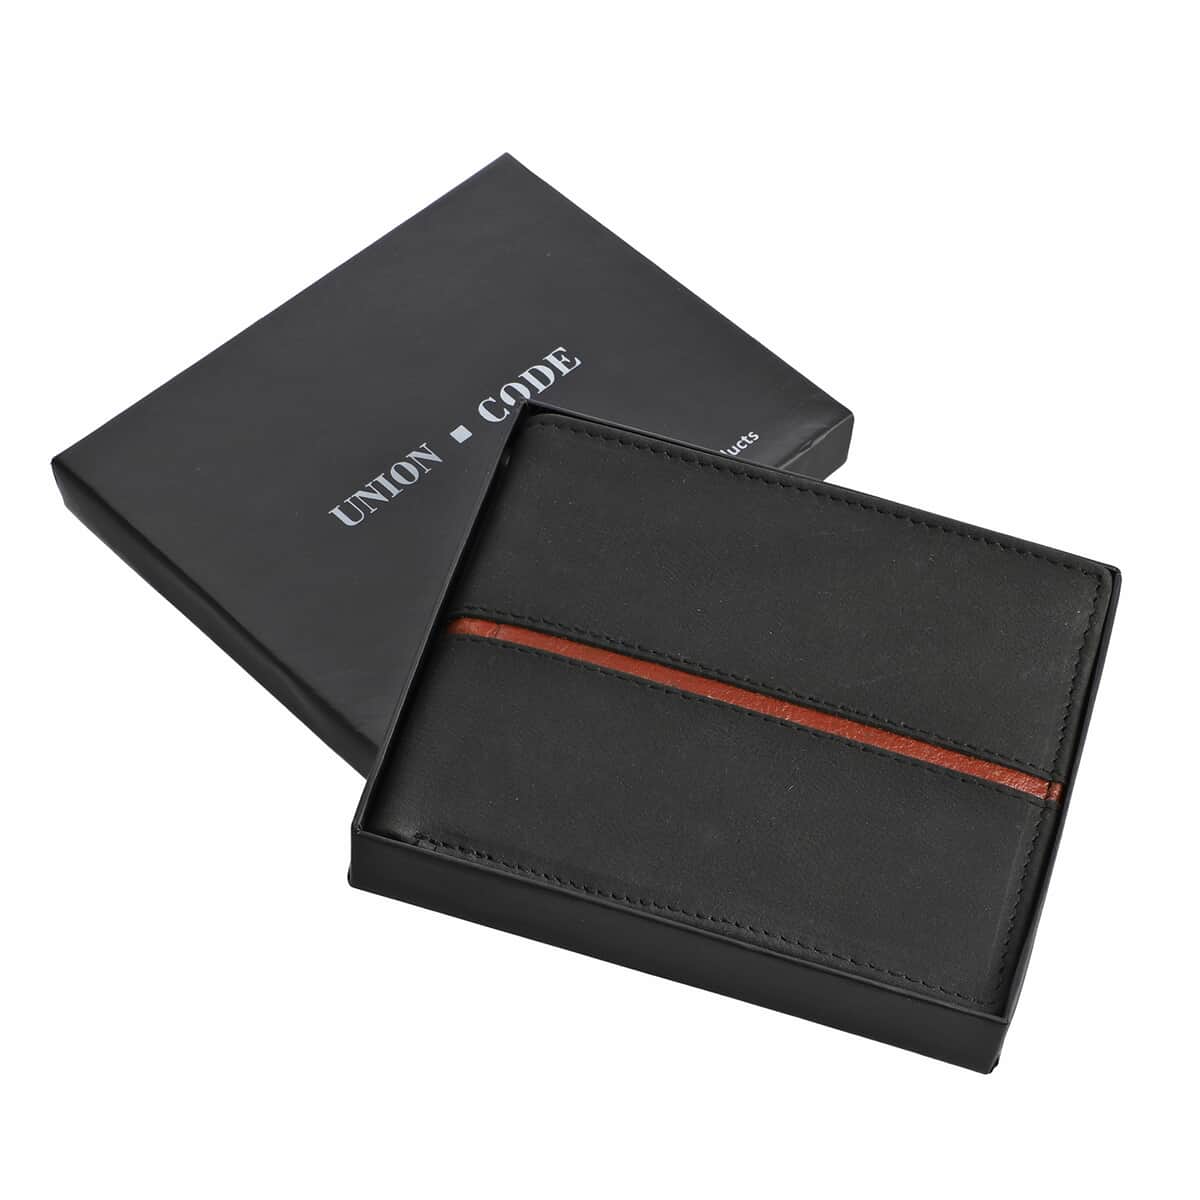 "UNION CODE Genuine Leather Bi Fold Men's Wallet (RFID Protected) SIZE: 4.25(L)x3.25(H) inches COLOR: Black" image number 6